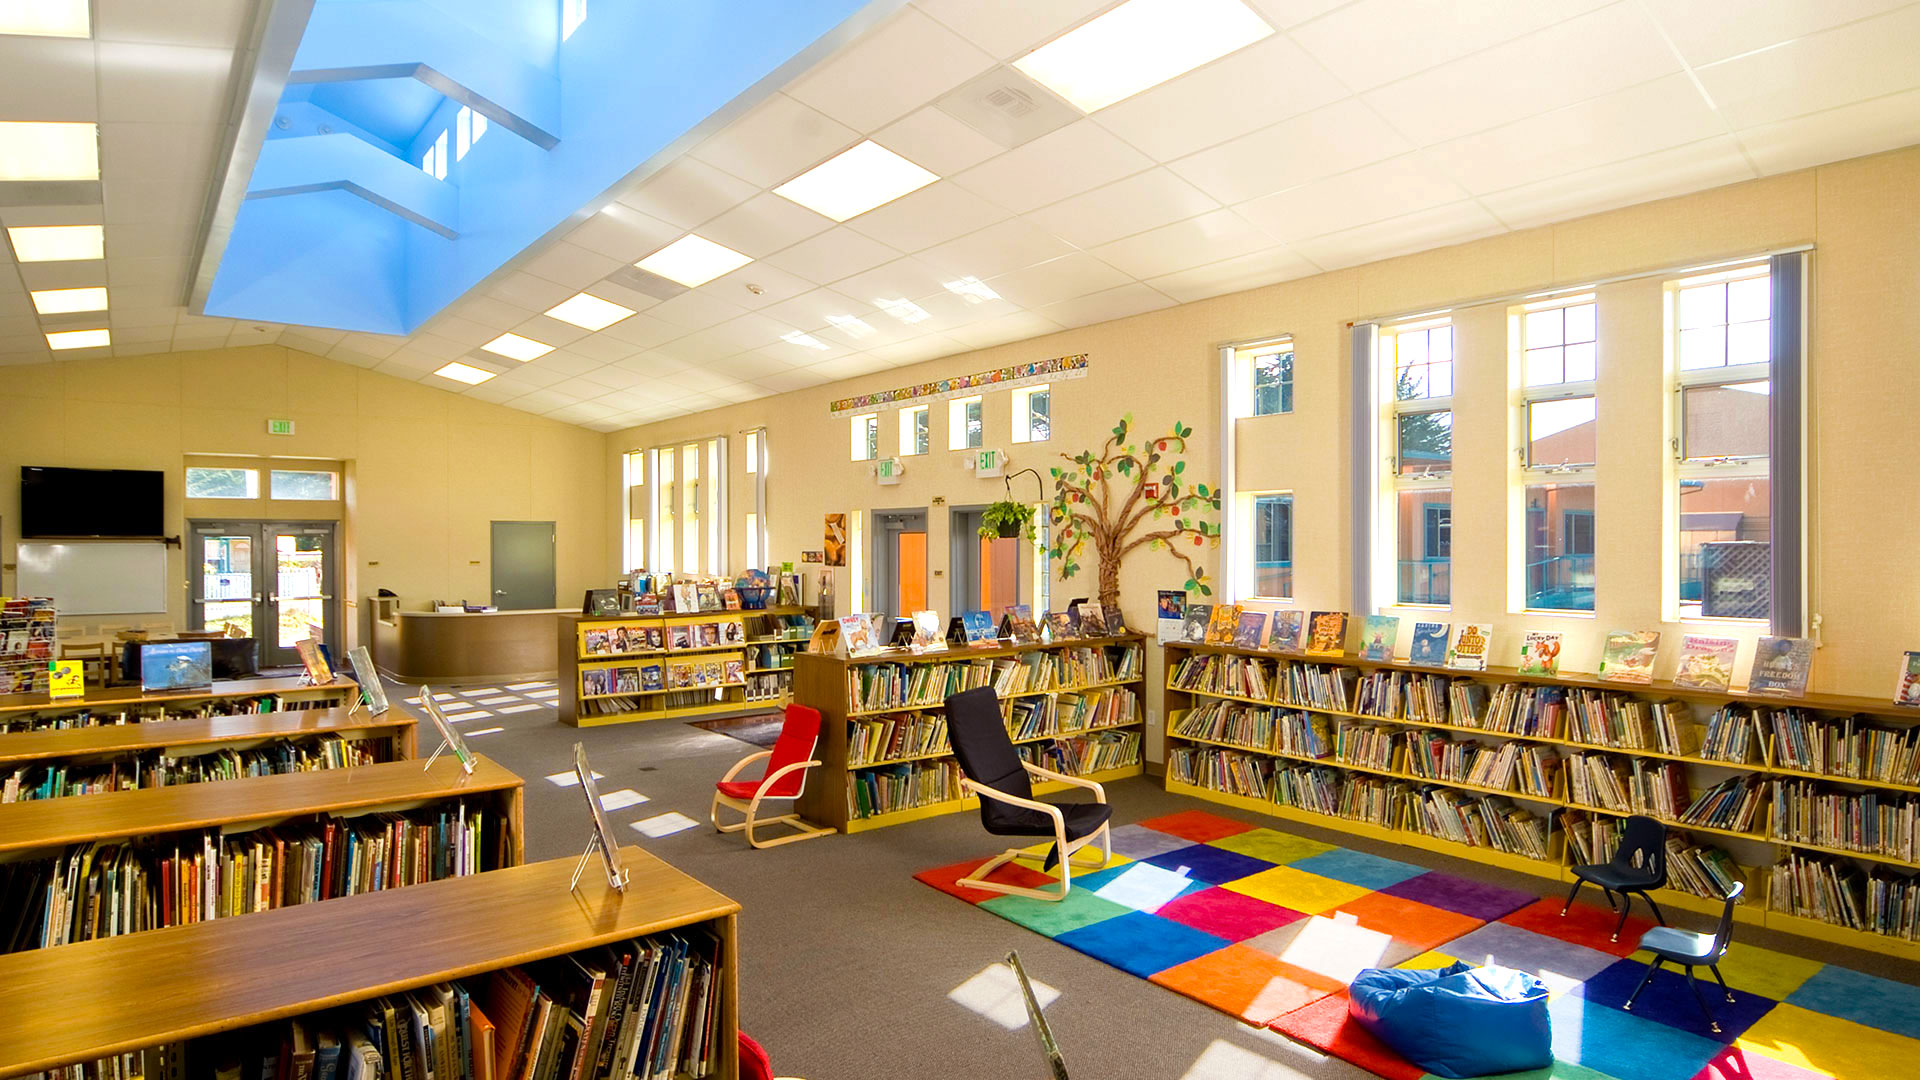 Interior of library, bookshelves and seating organized around with bright fun rugs group reading.